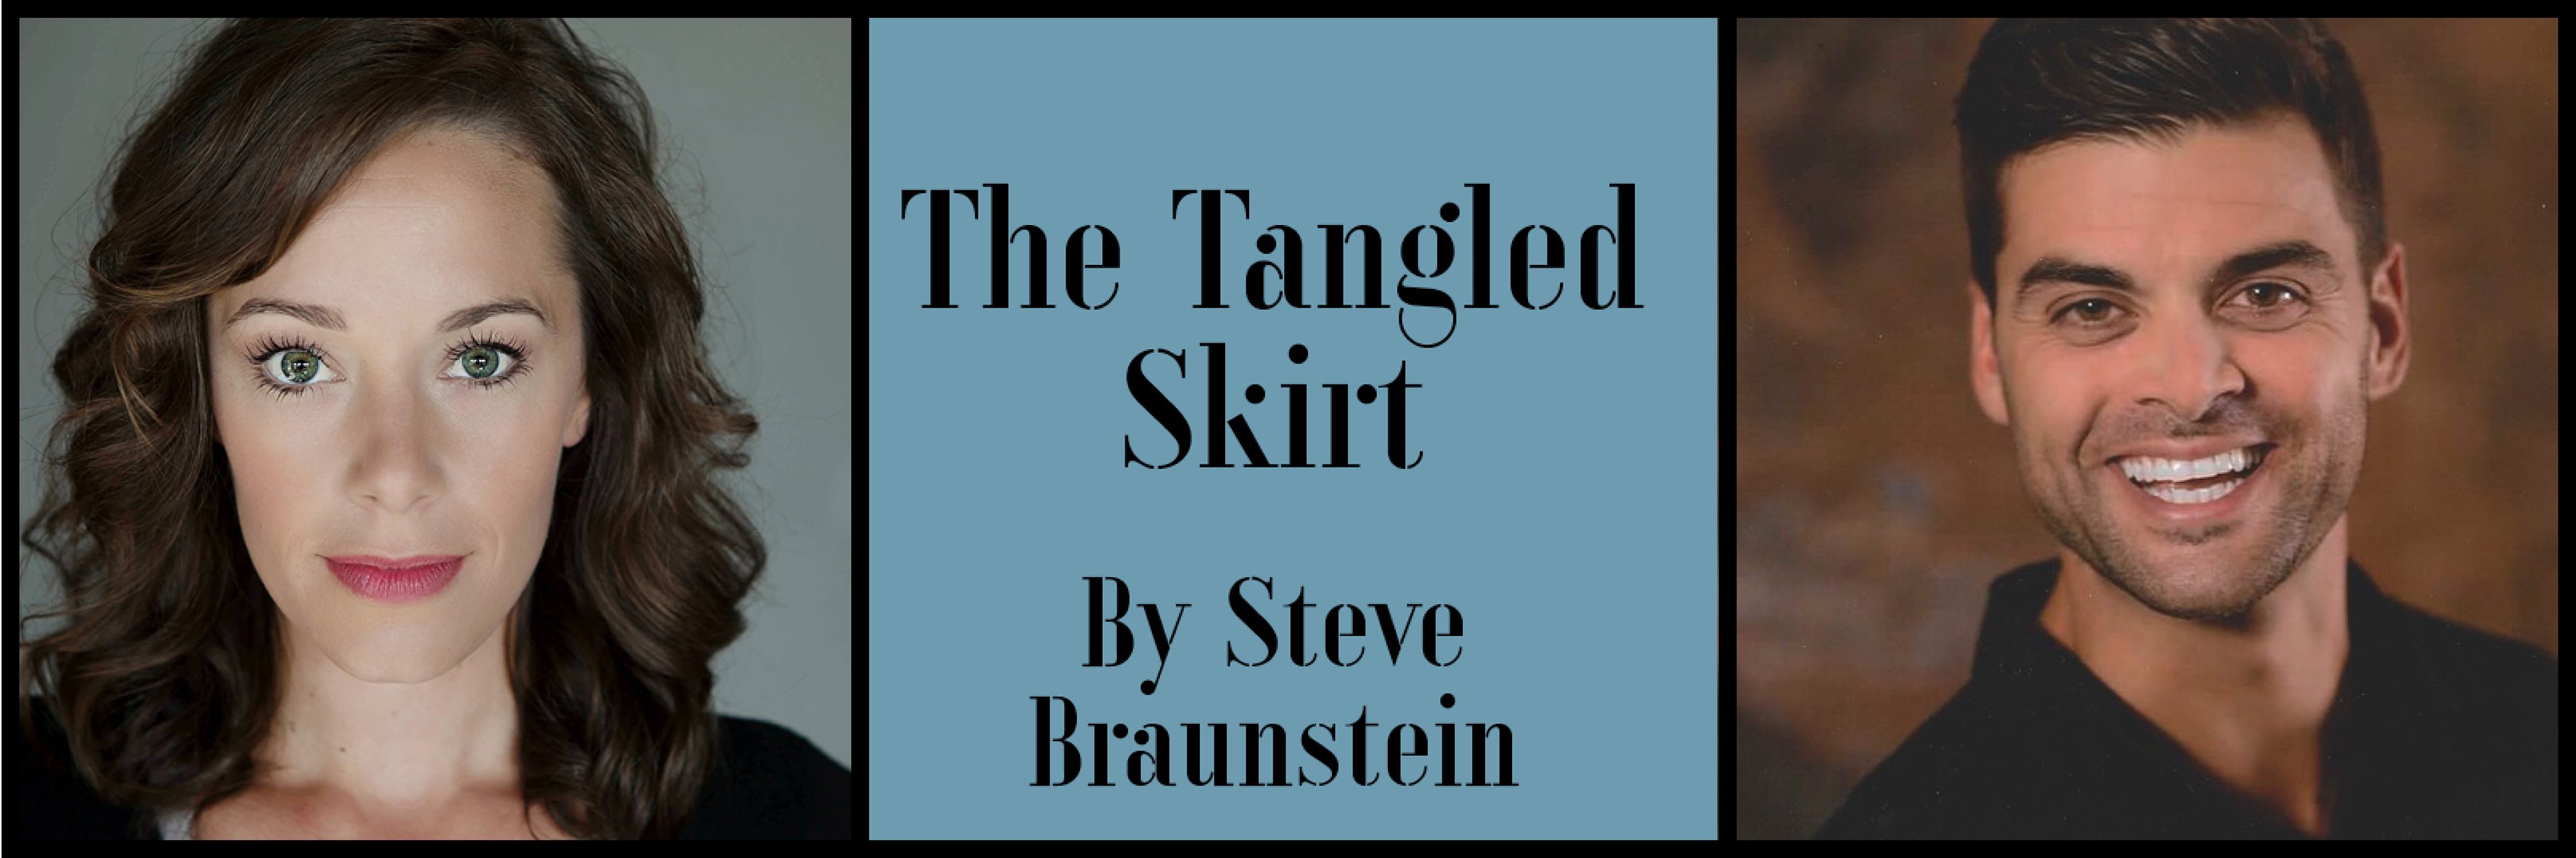 The Tangled Skirt by Unity Theatre